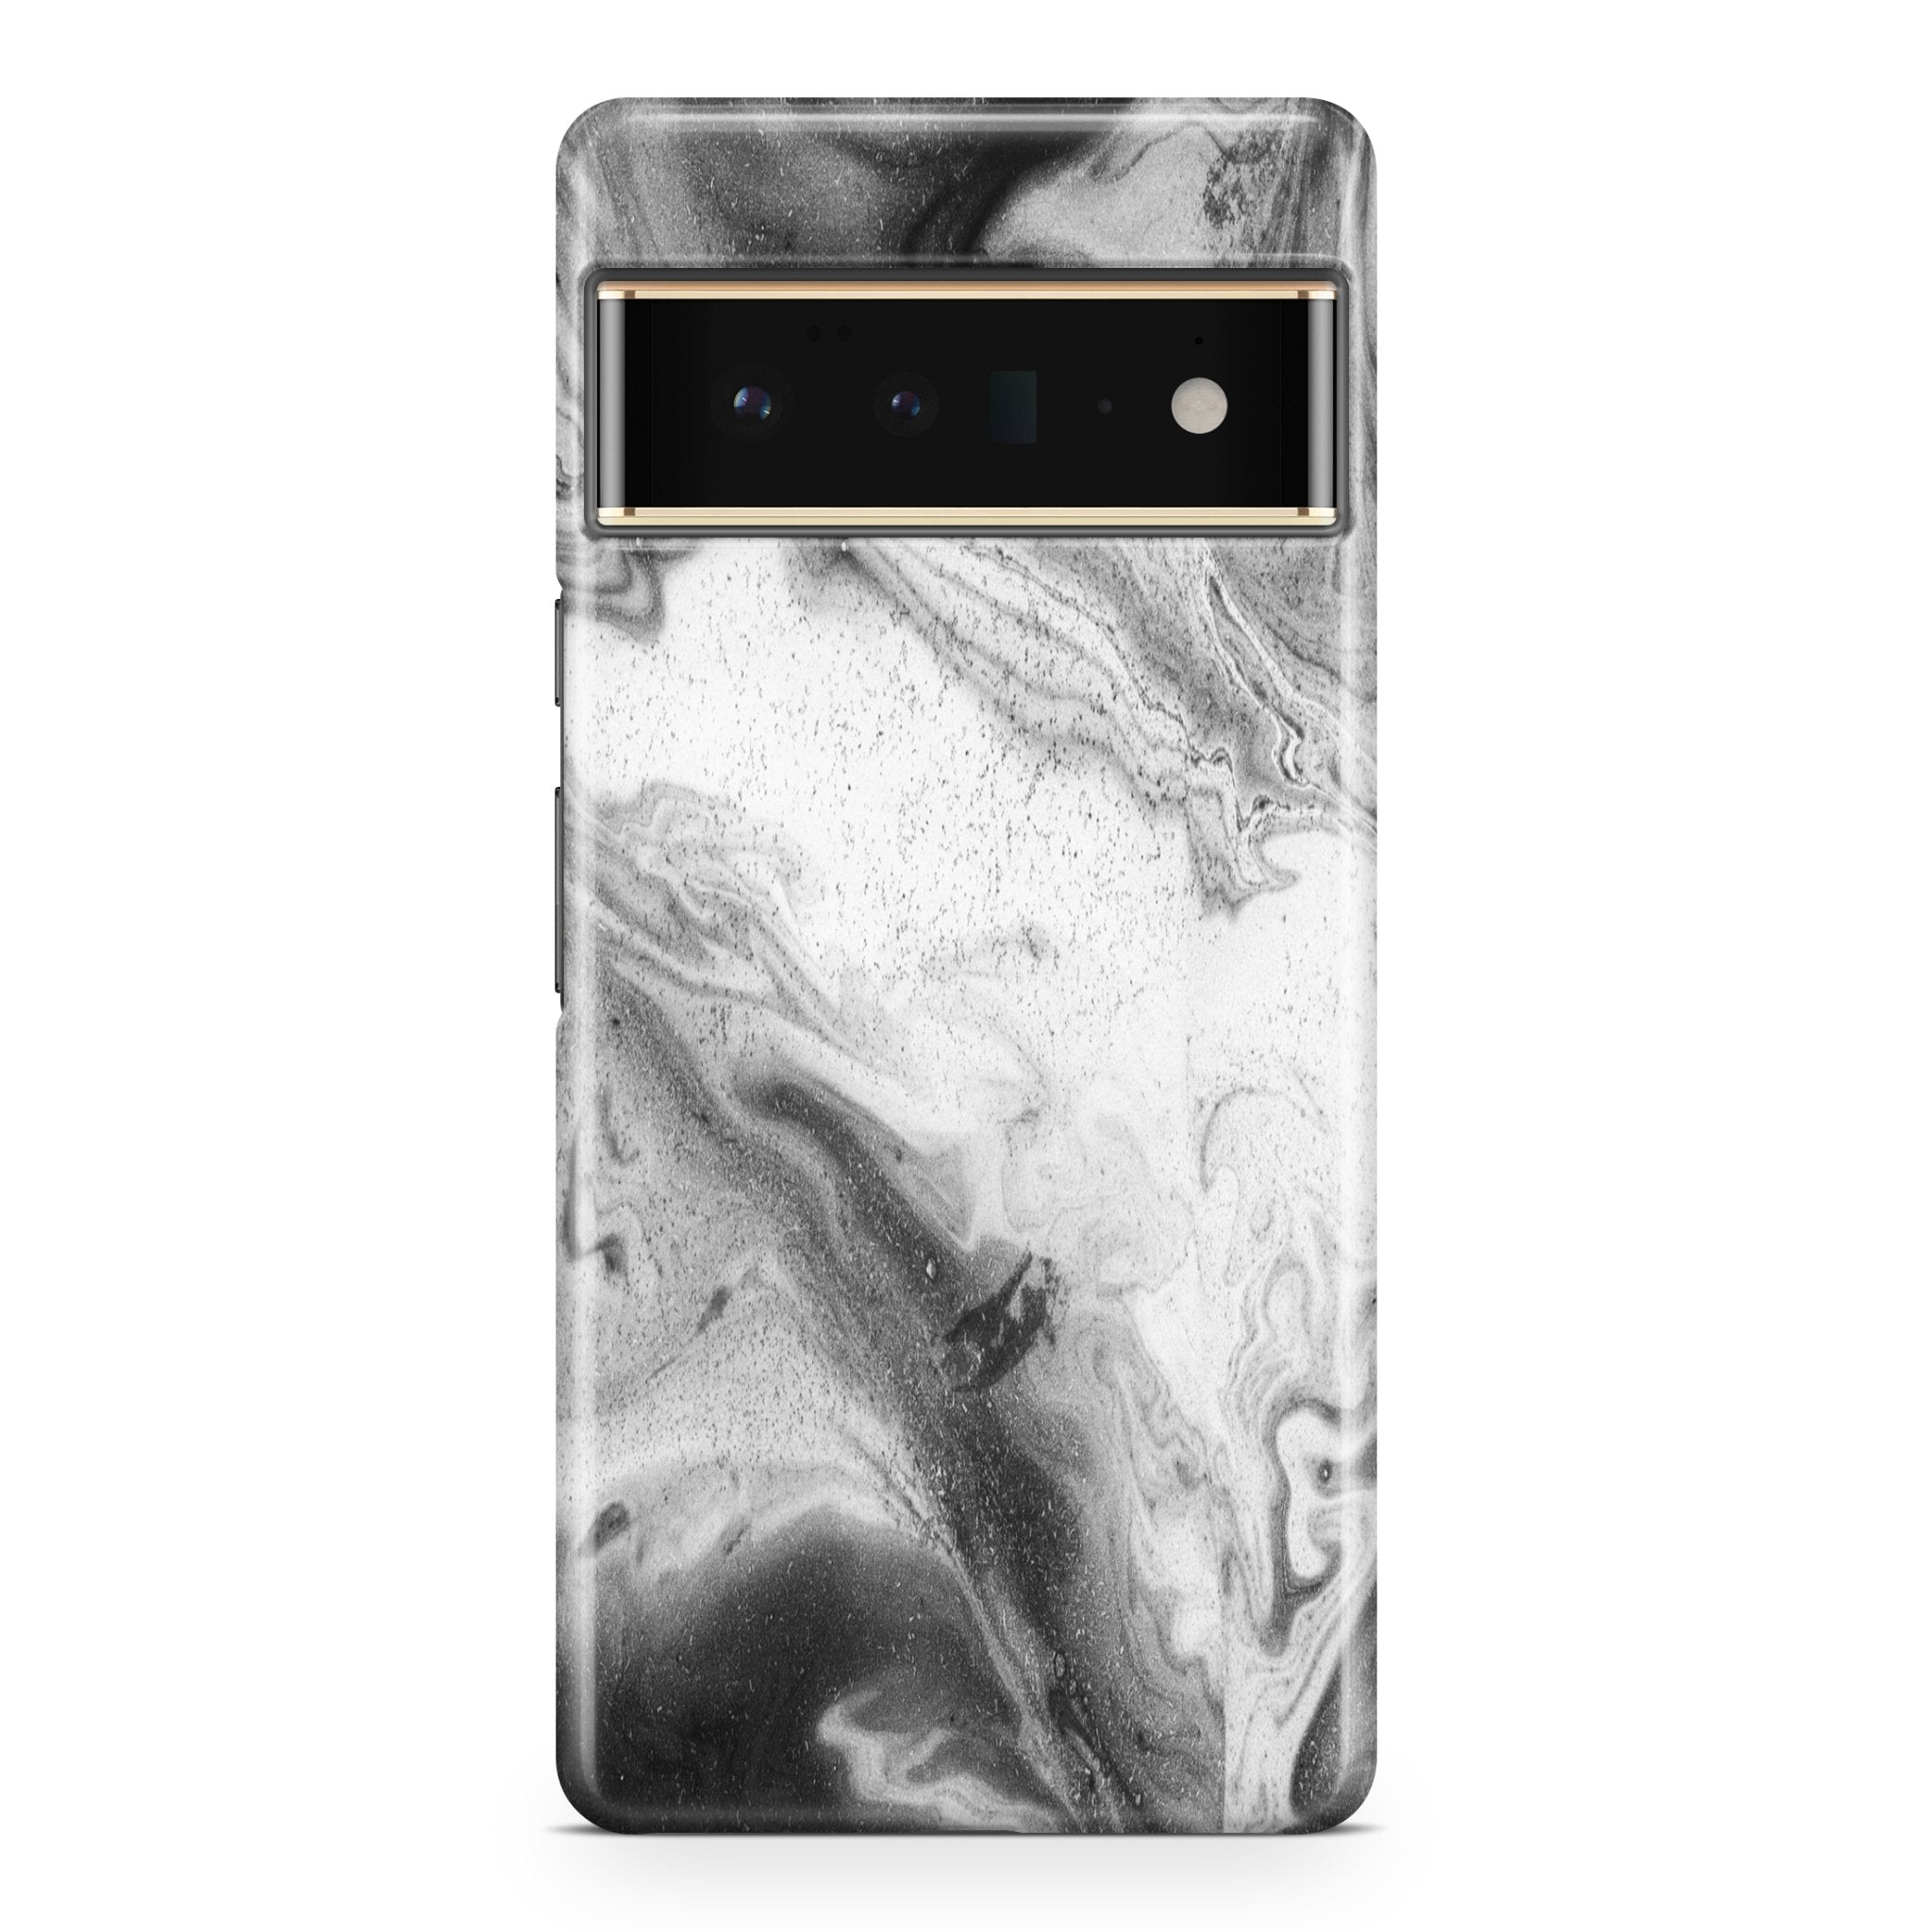 Black & White Marble Series III - Google phone case designs by CaseSwagger